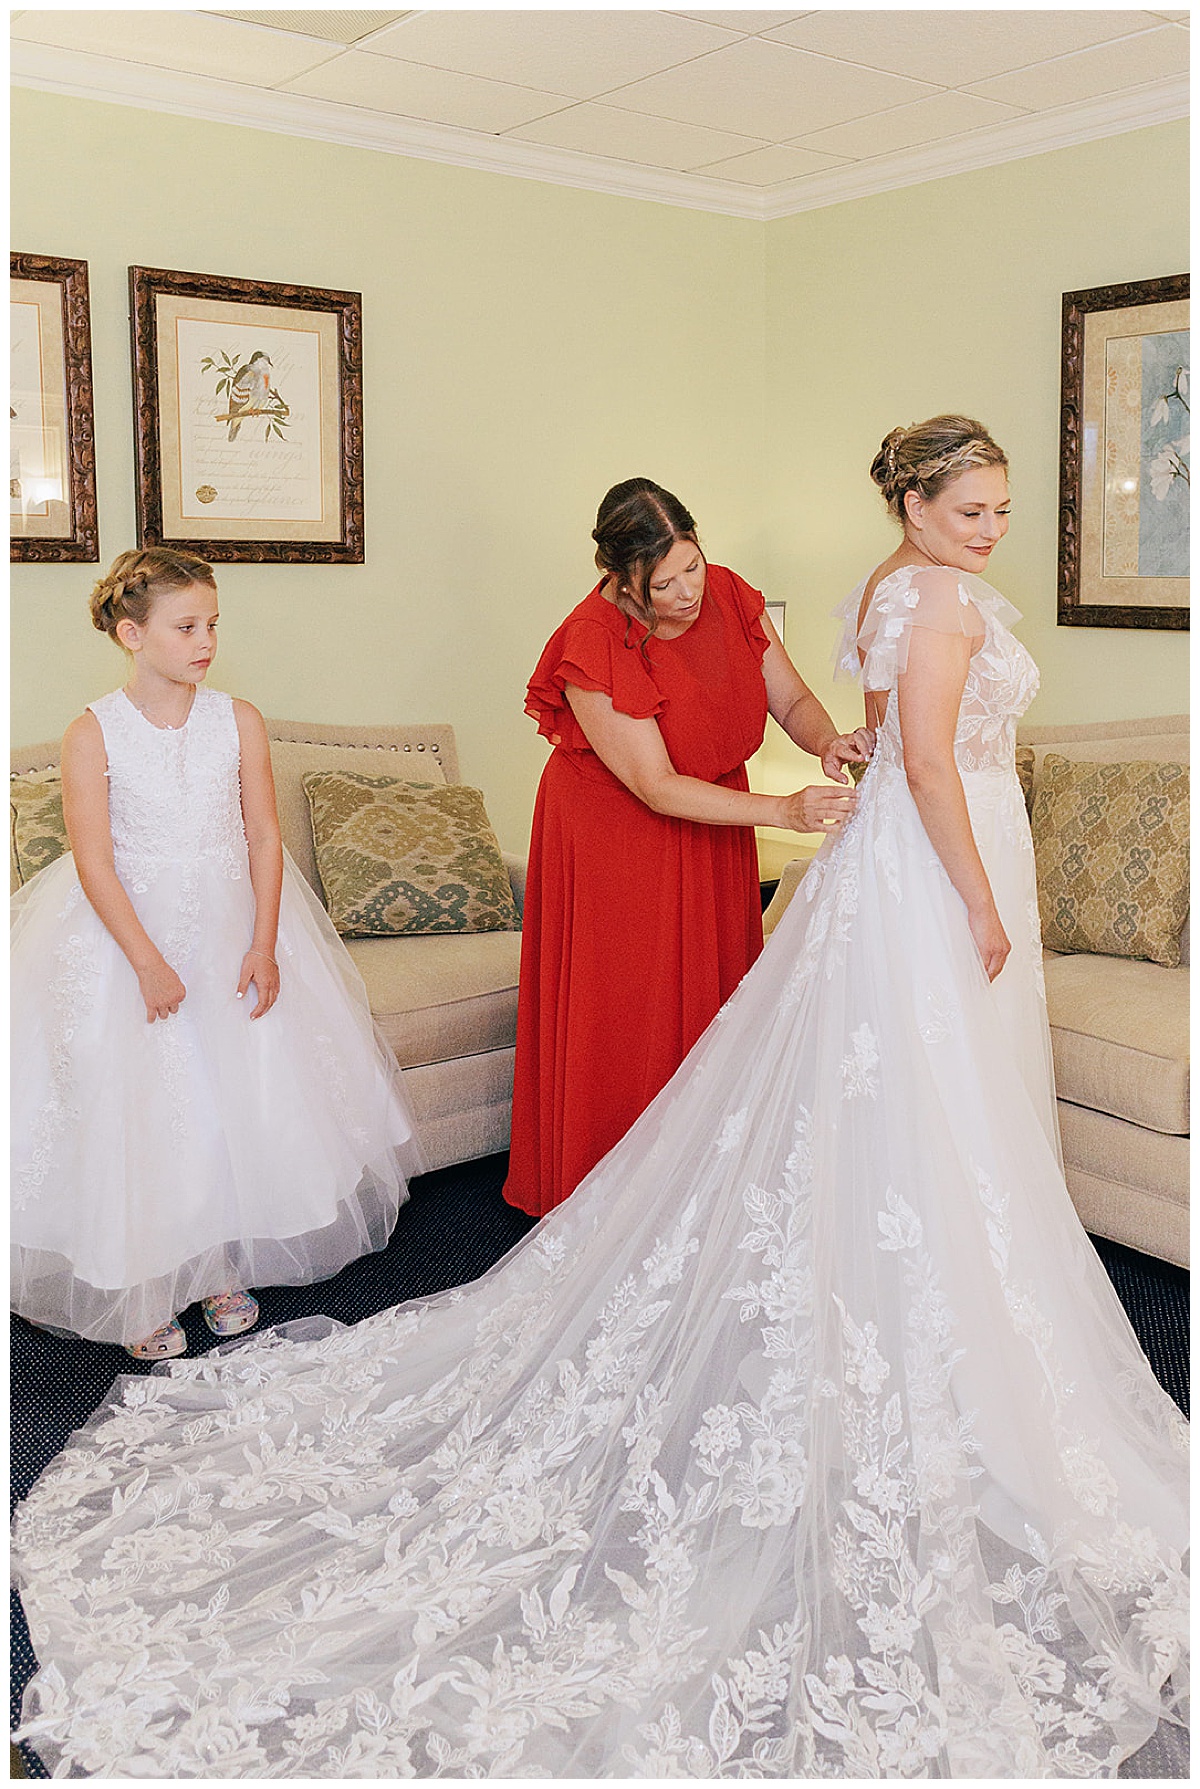 Family and friends help bride into her dress for Kayla Bouren Photography